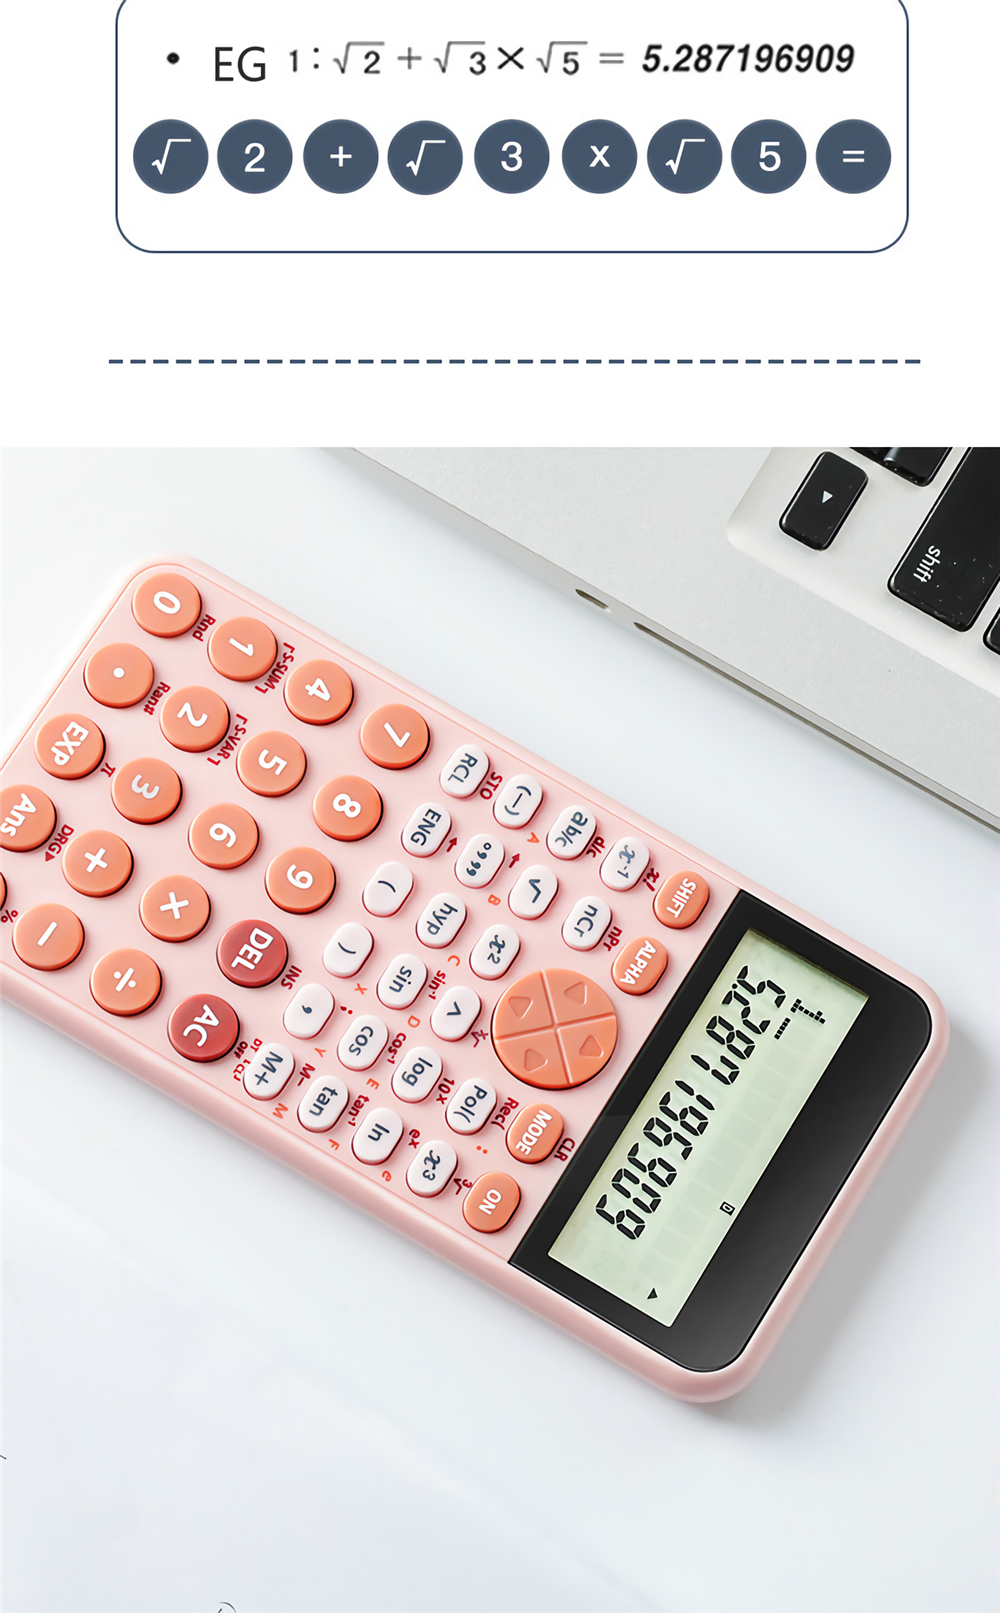 Scientific-Function-Calculator-240-Calculation-Methods-Calculating-Tool-for-School-Office-Supplies-E-1838530-4